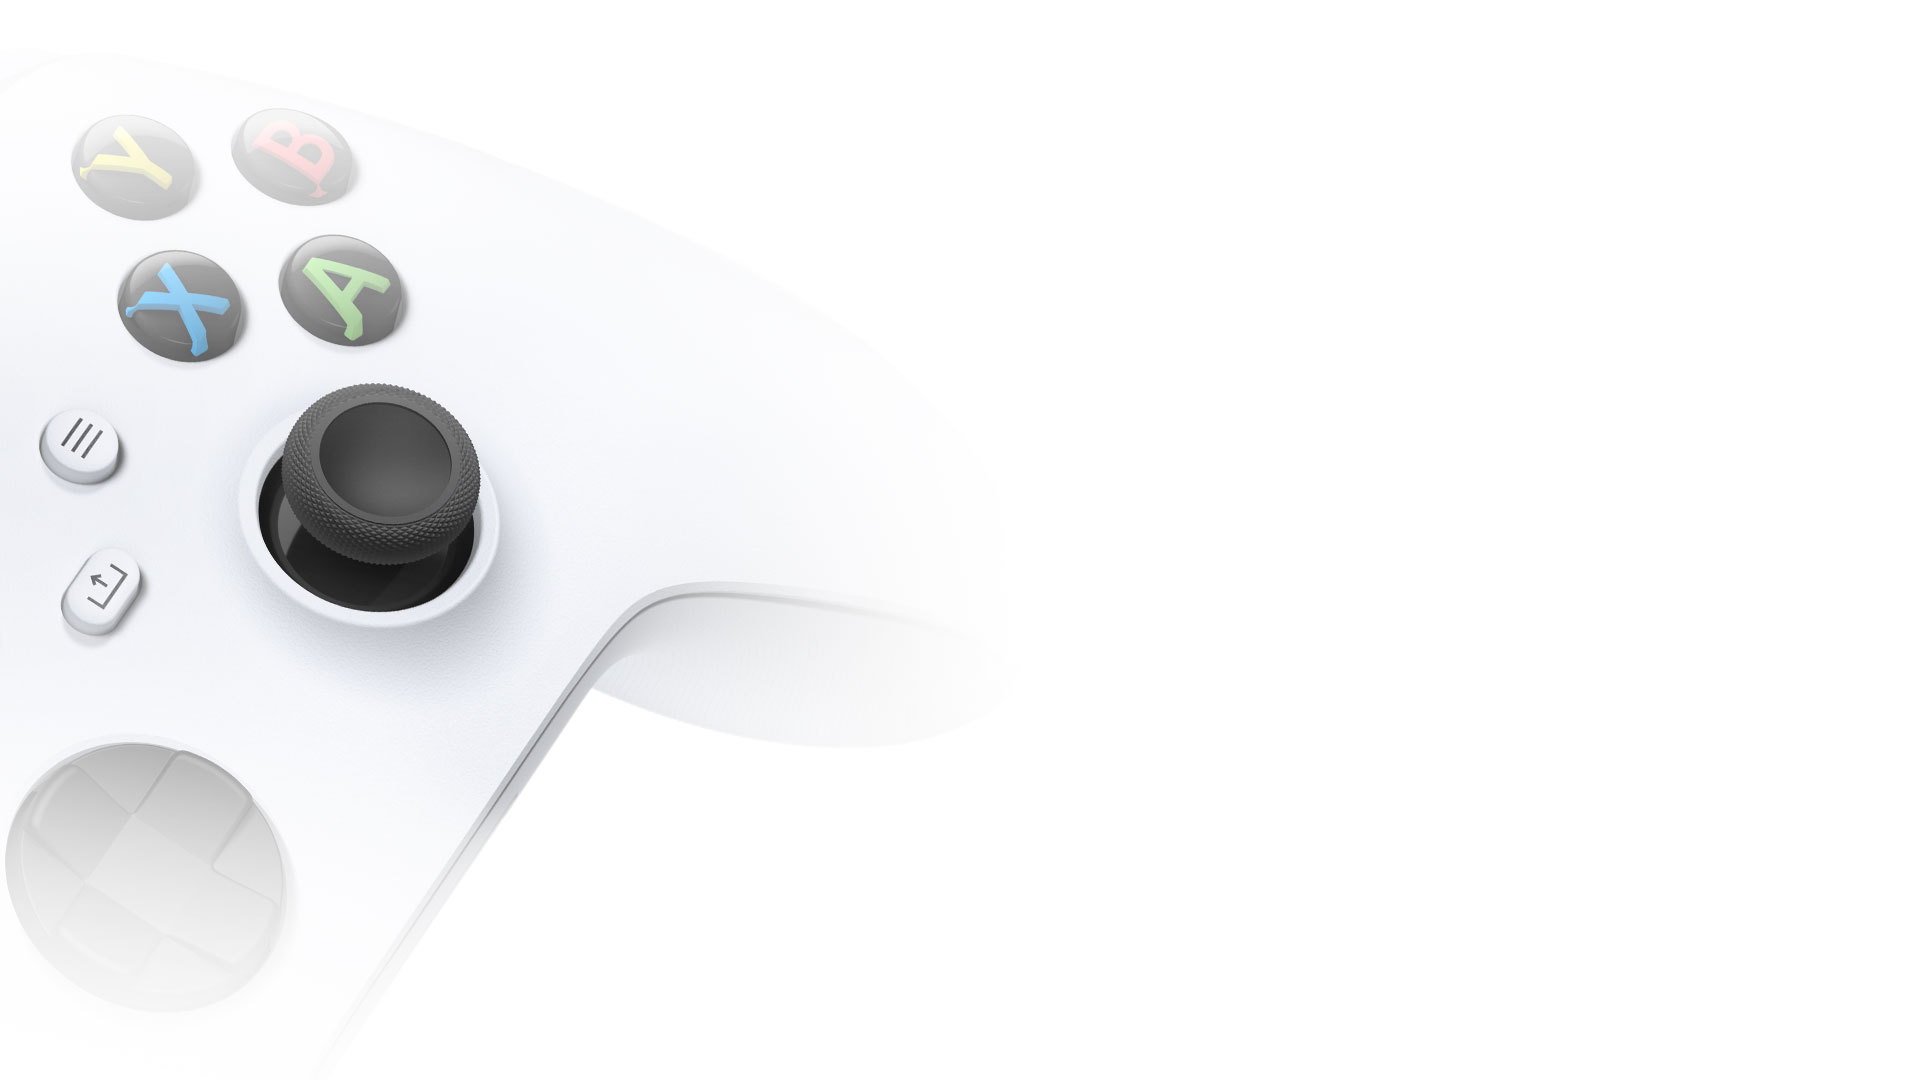 Side angle view of the Xbox Wireless Controller - White